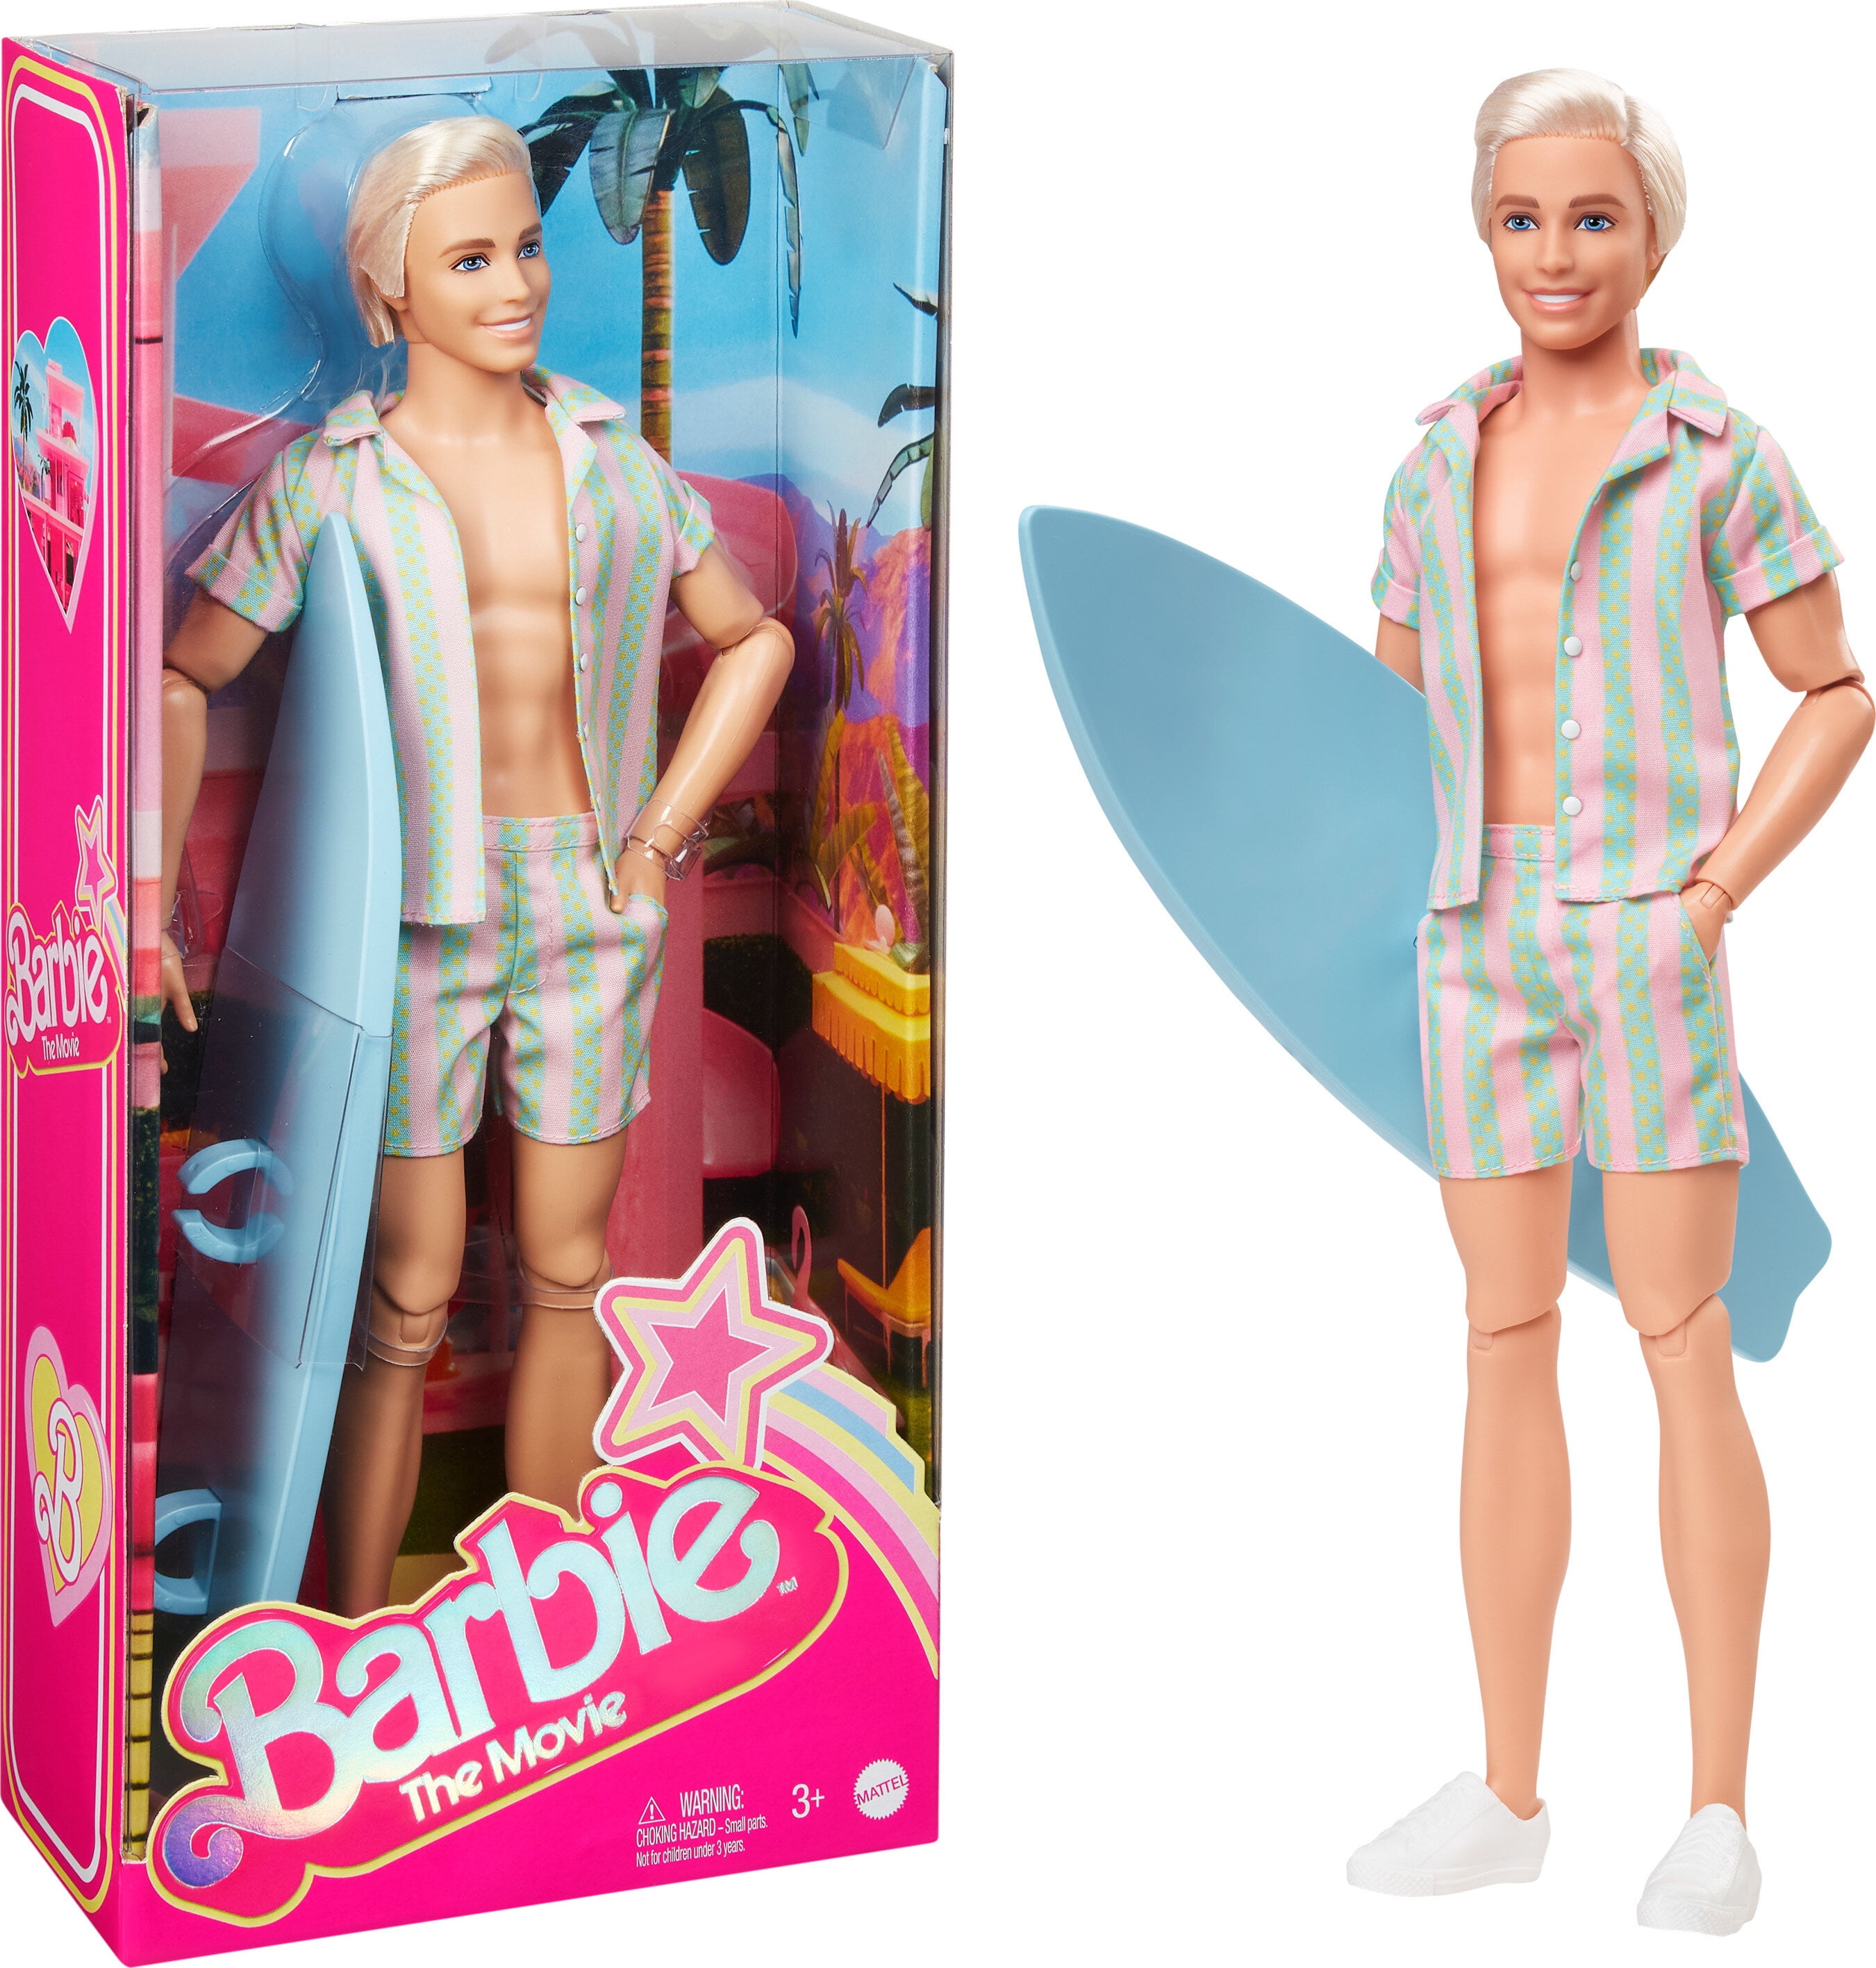 Barbie Made to Move Barbie Doll, Blue Top - Barbie Collectibles